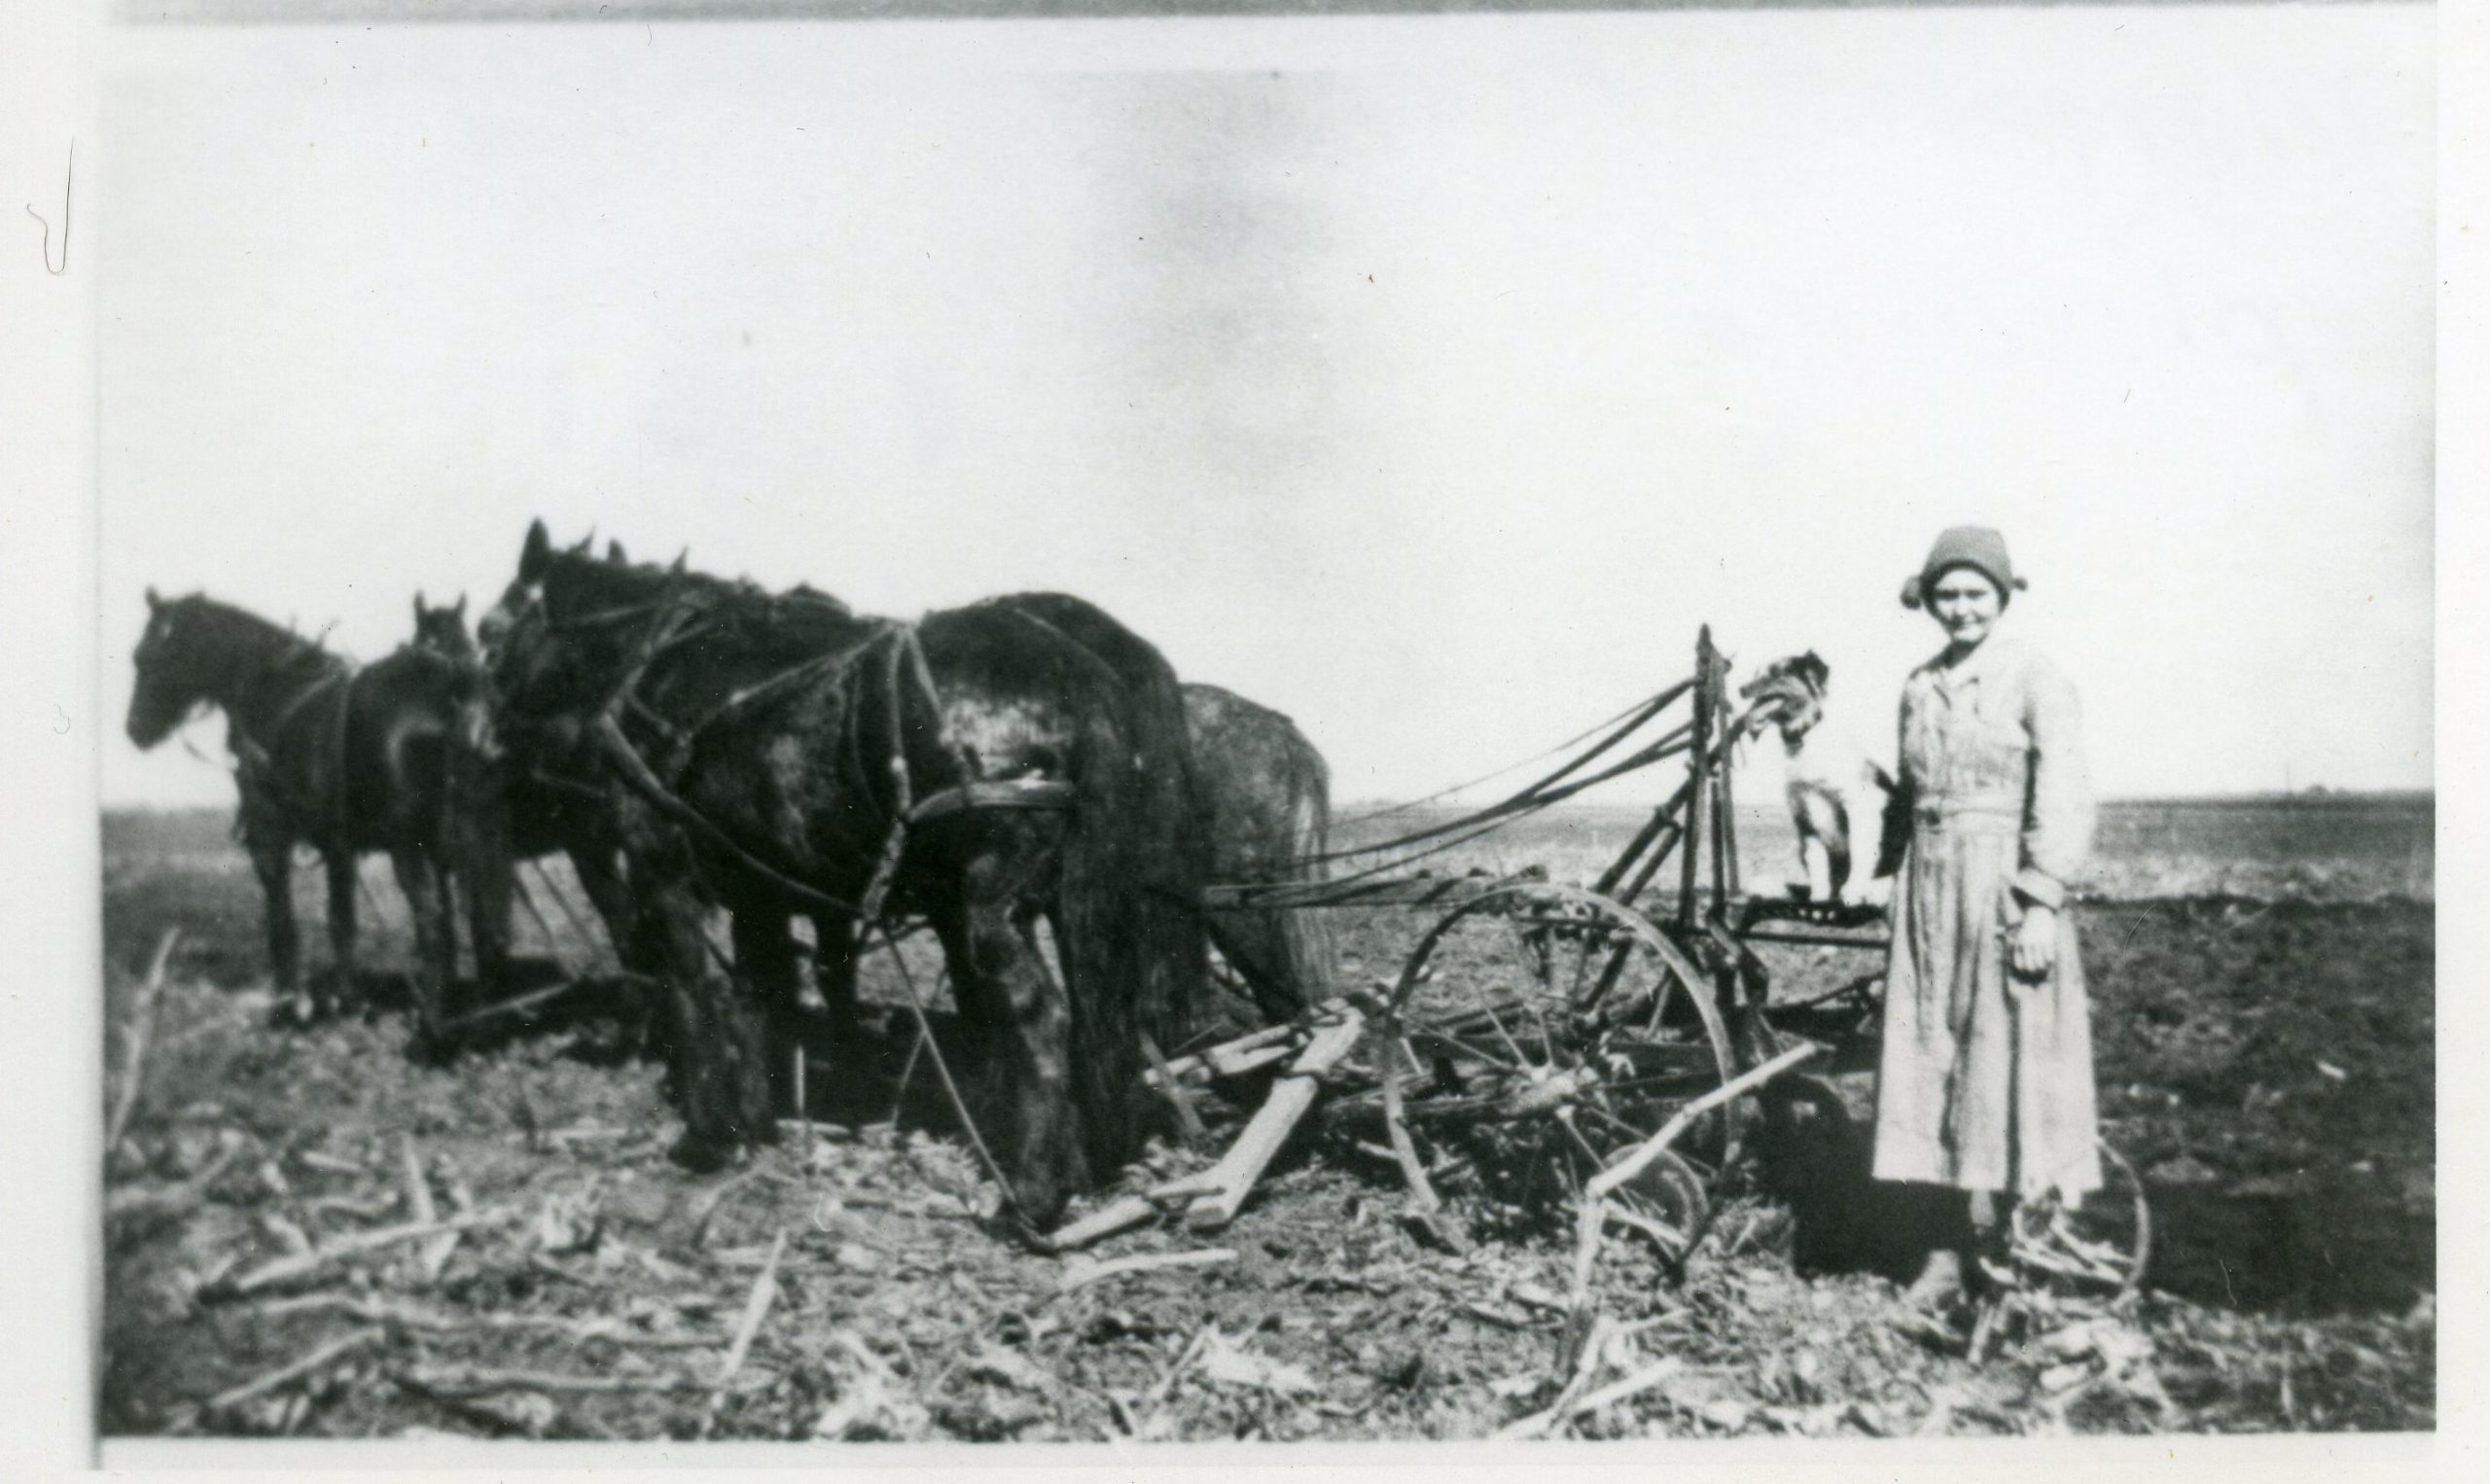 Woman, dog, plow and horses. Courtesy of Adams County Historical Society